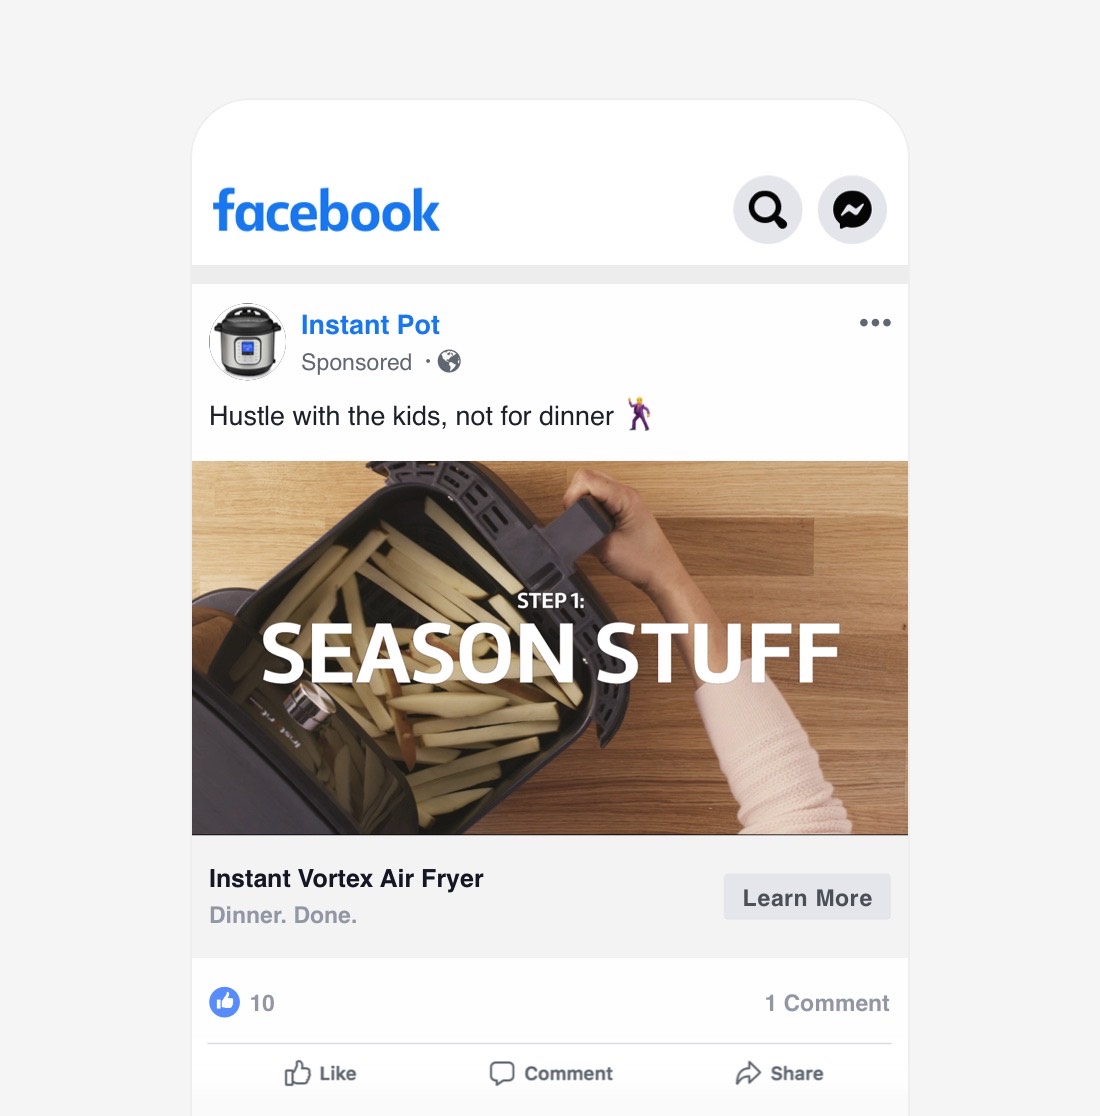 Screen shot showing an Instant Pot sponsored post on Facebook.